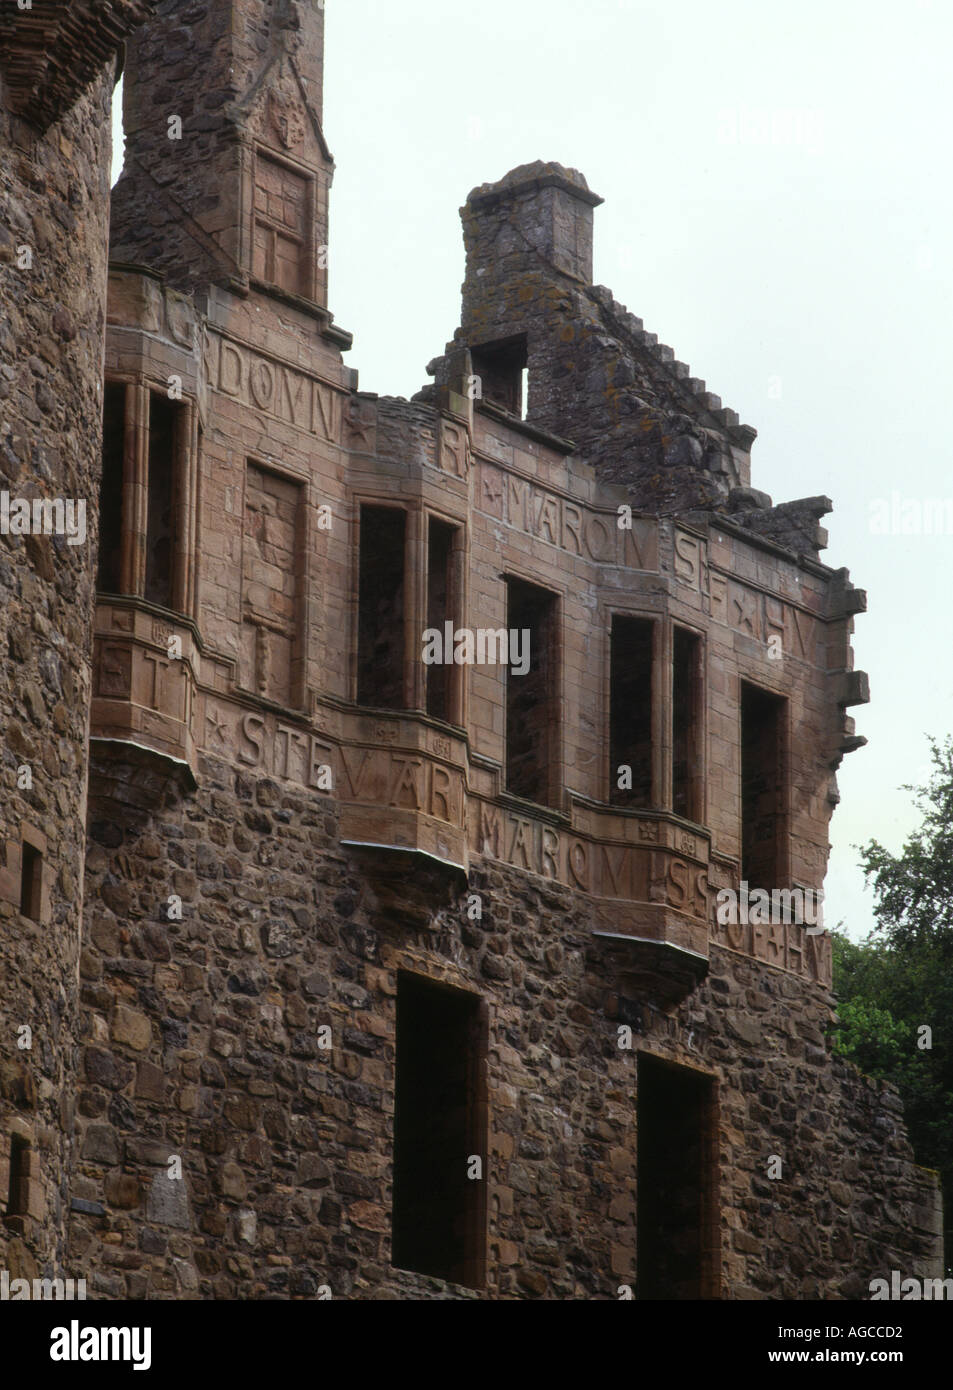 dh  HUNTLY CASTLE ABERDEENSHIRE Ruined castles with stone carved letters on walls scotland Stock Photo